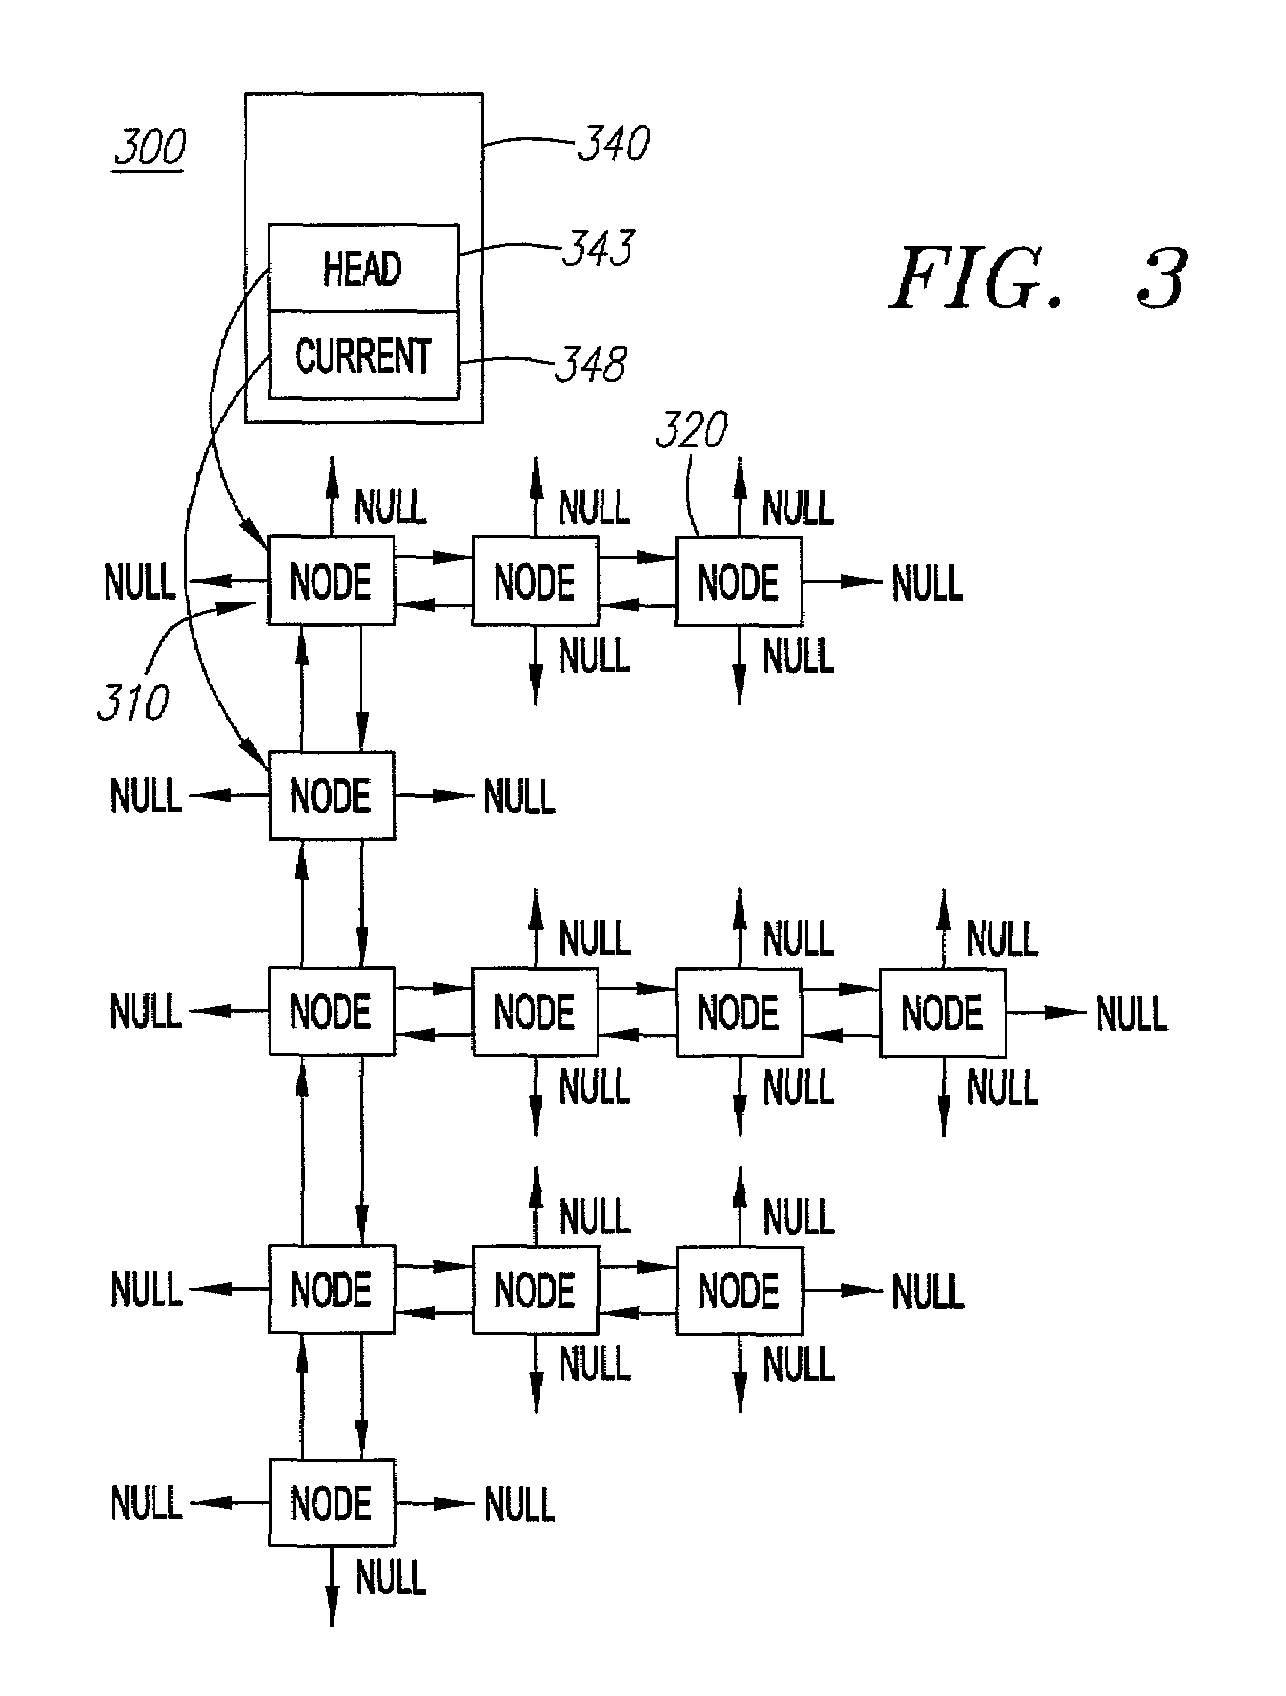 Systems and methods for performing software performance estimations